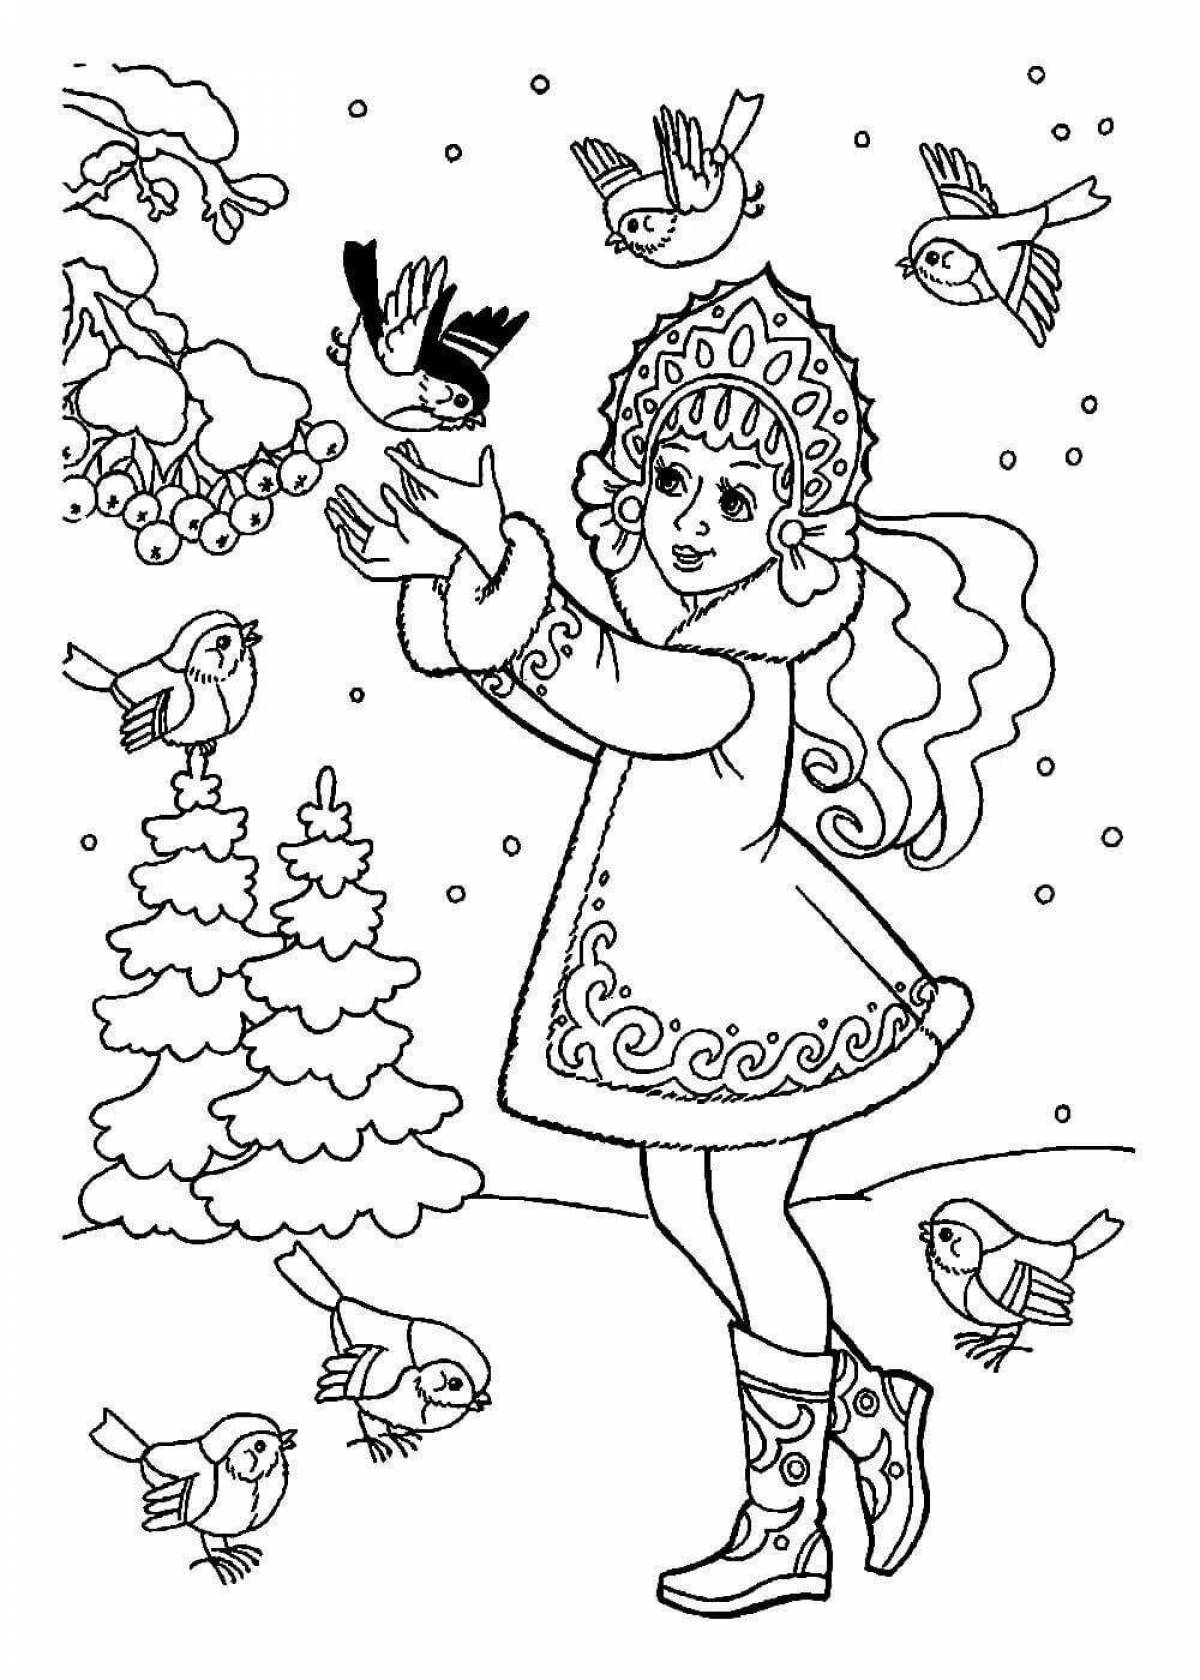 Great Snow Maiden coloring book for kids